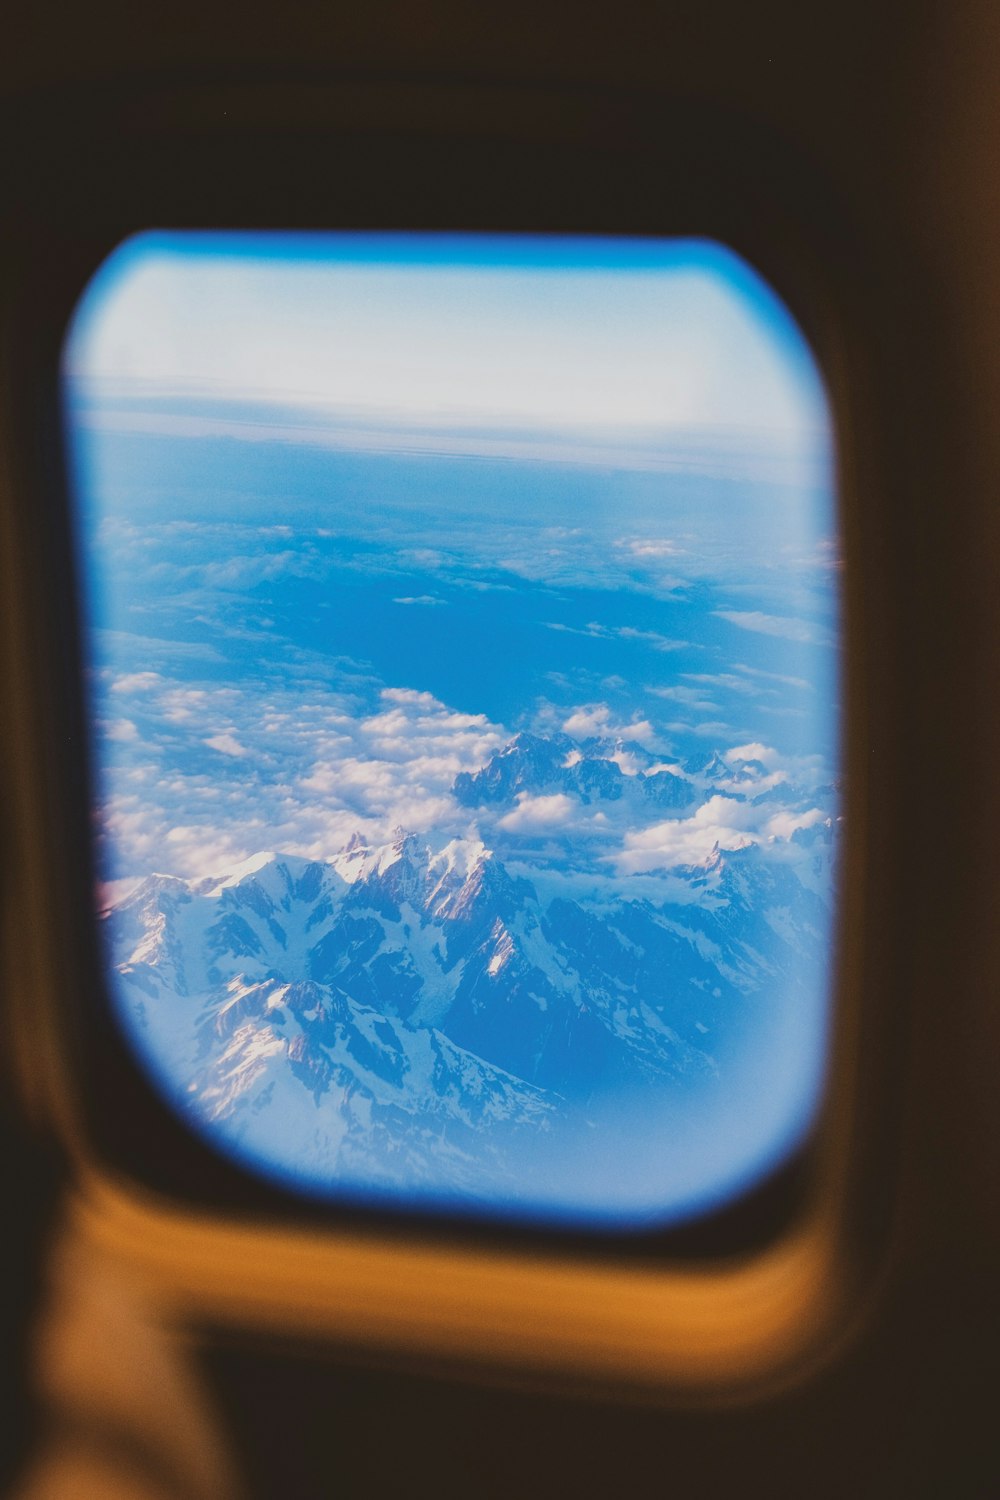 a view of the mountains from an airplane window